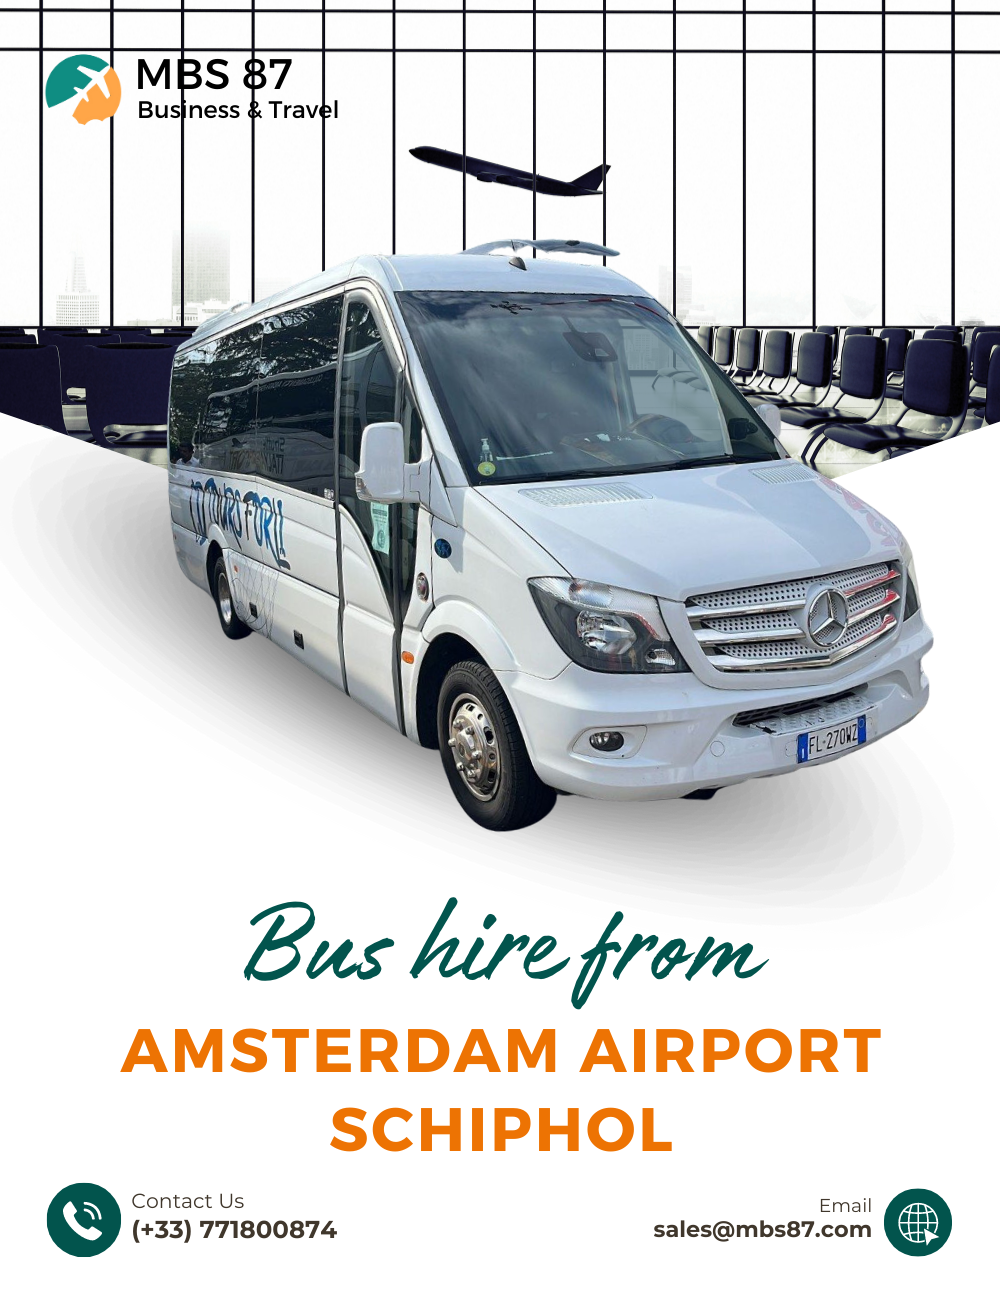 Bus service from Amsterdam Airport Schiphol